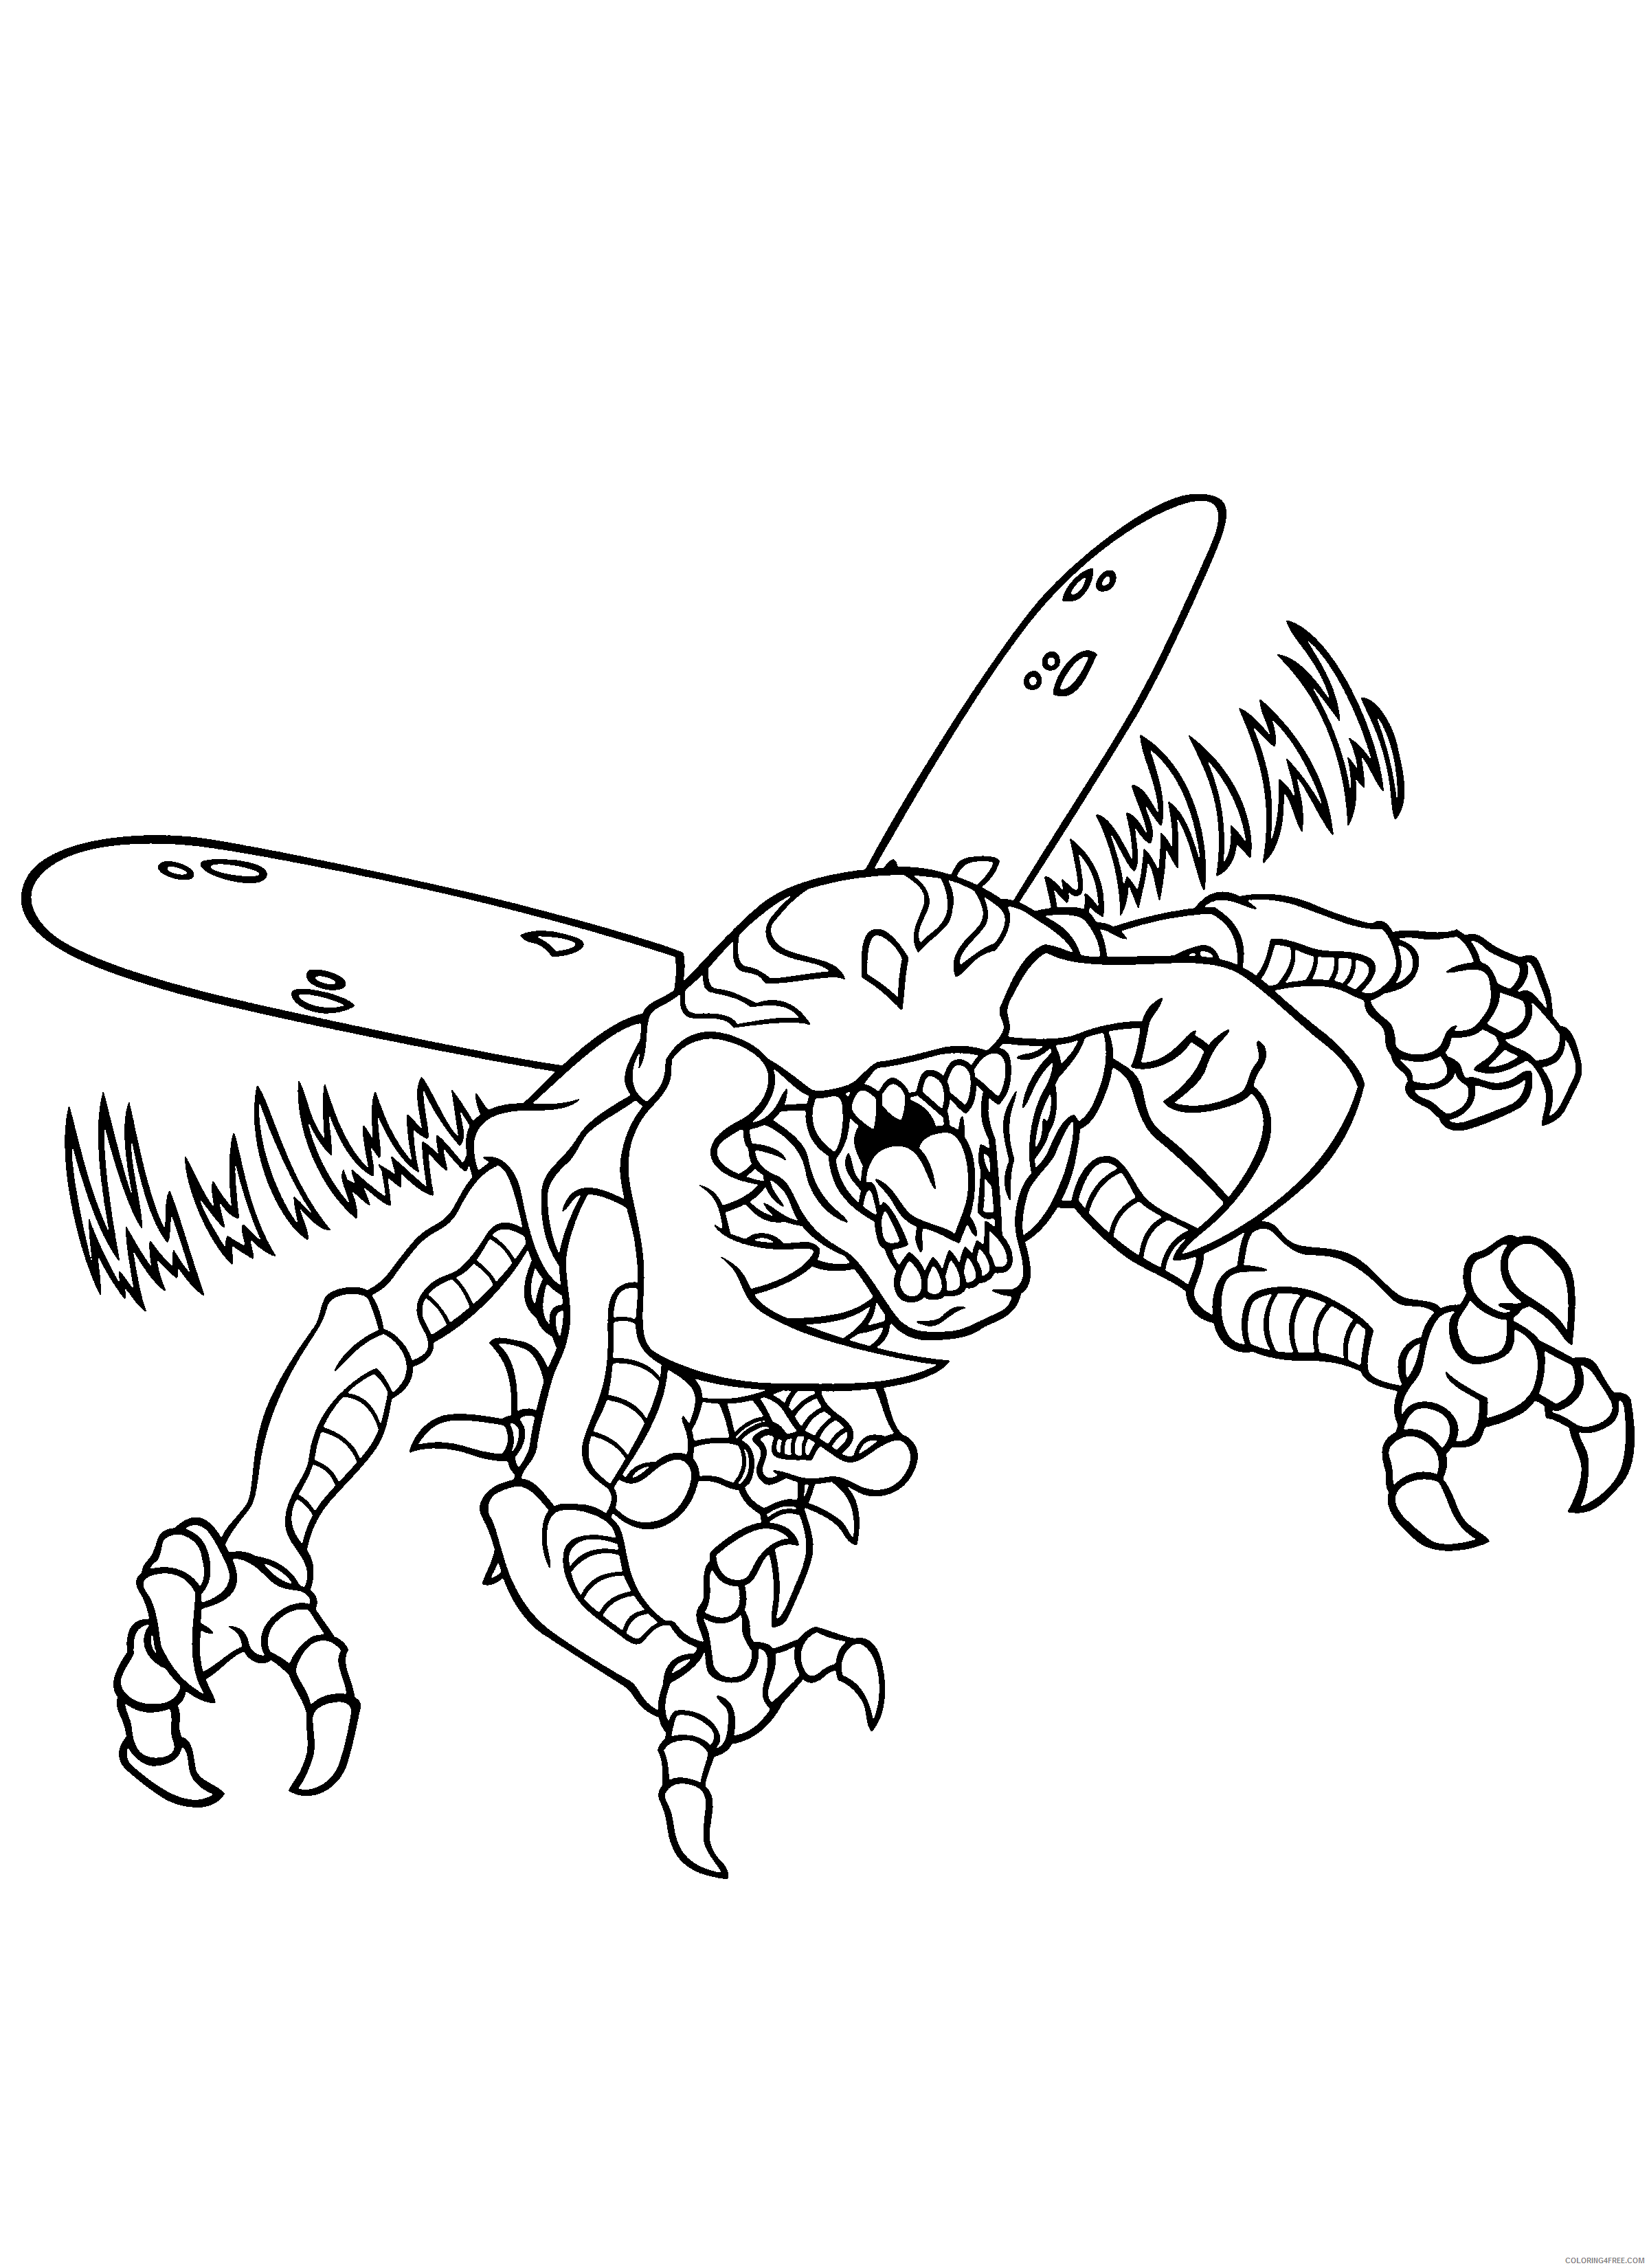 Digimon Printable Coloring Pages Anime digimon 165 2021 0254 Coloring4free